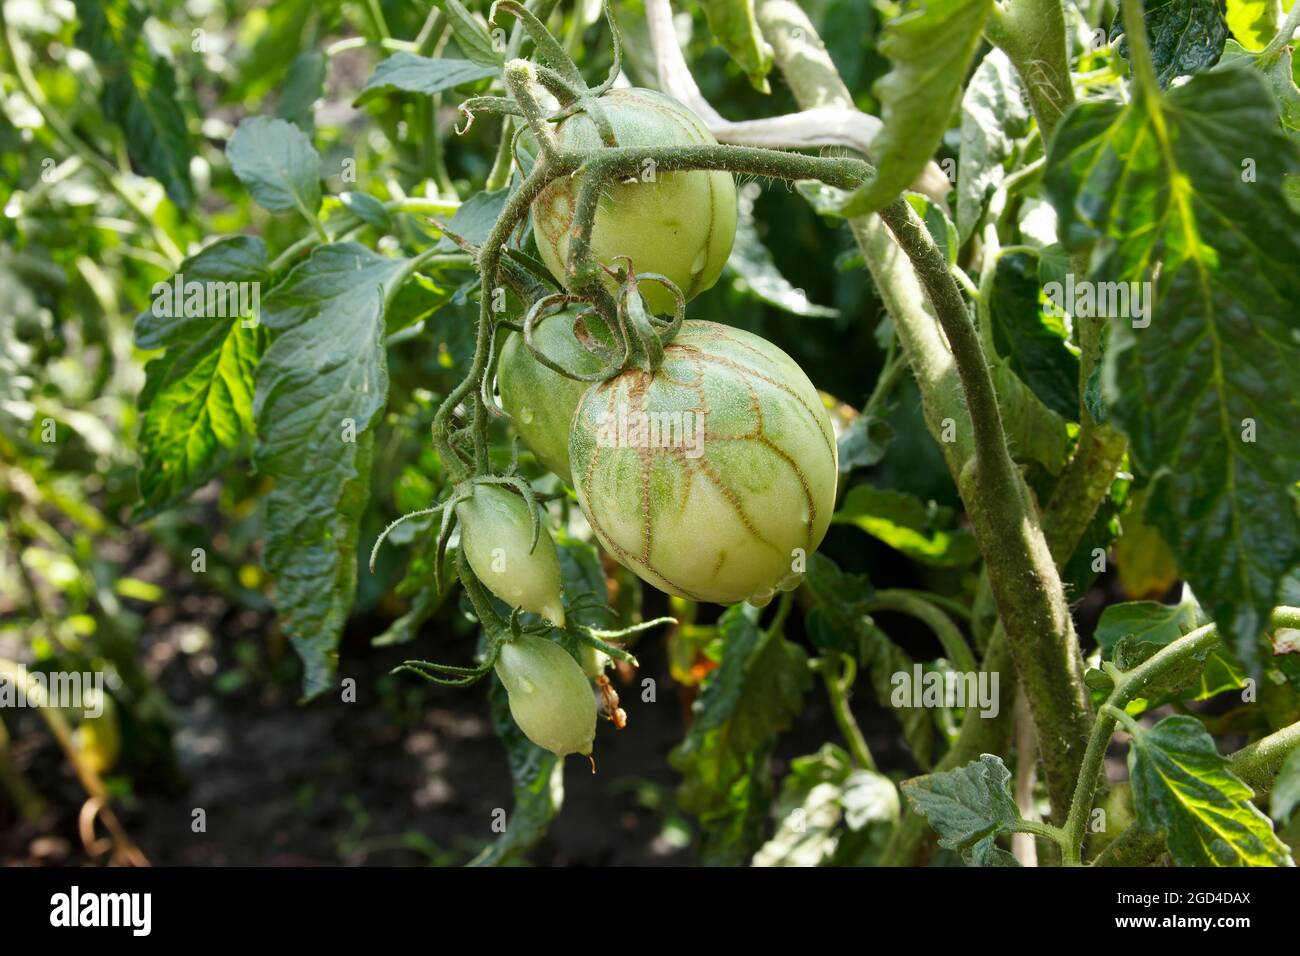 Tomato zippering. Diseases of tomatoes. Zipper-like lesion. Thin brown necrotic scars on the green fruits. Groovers into the fruit flesh and deformati Stock Photo